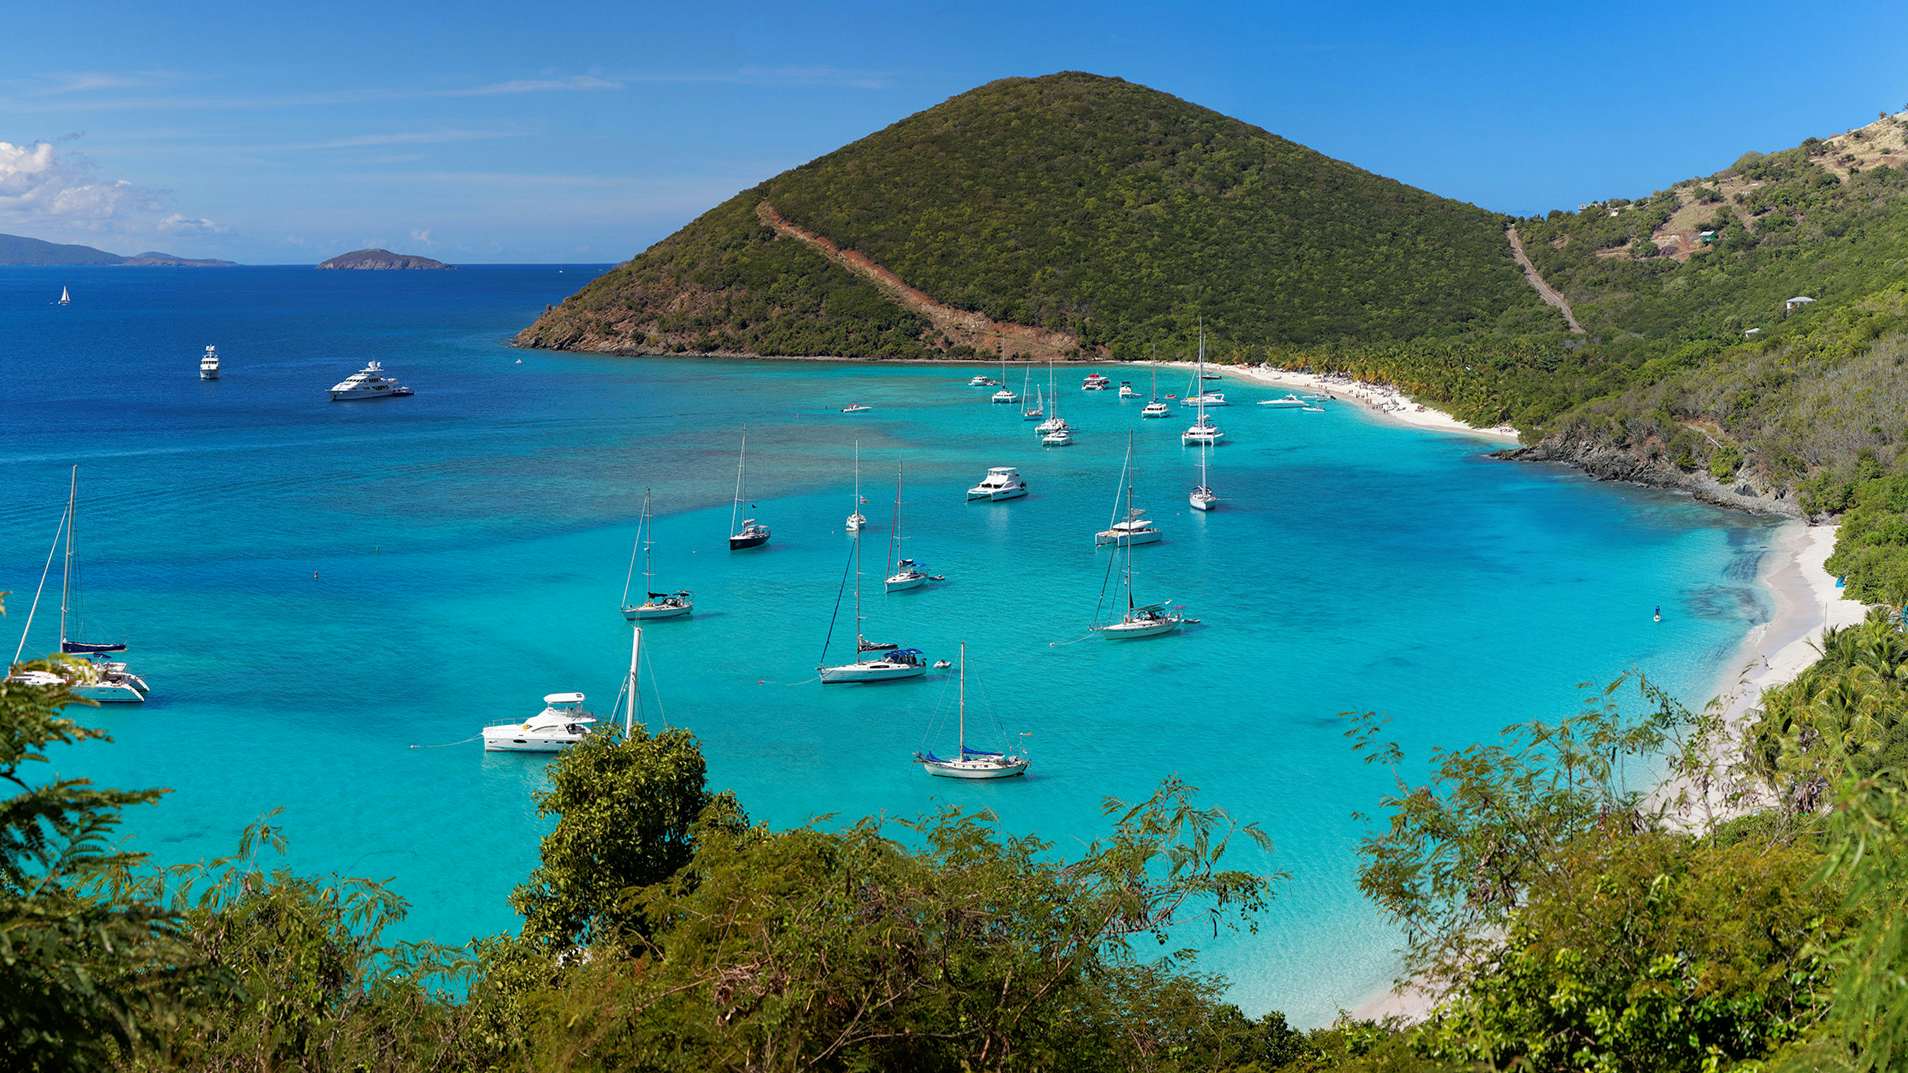 BVI Yacht for Charter - Panoramic view of tropical shoreline in British Virgin Island (BVI), Caribbean with yachts anchored